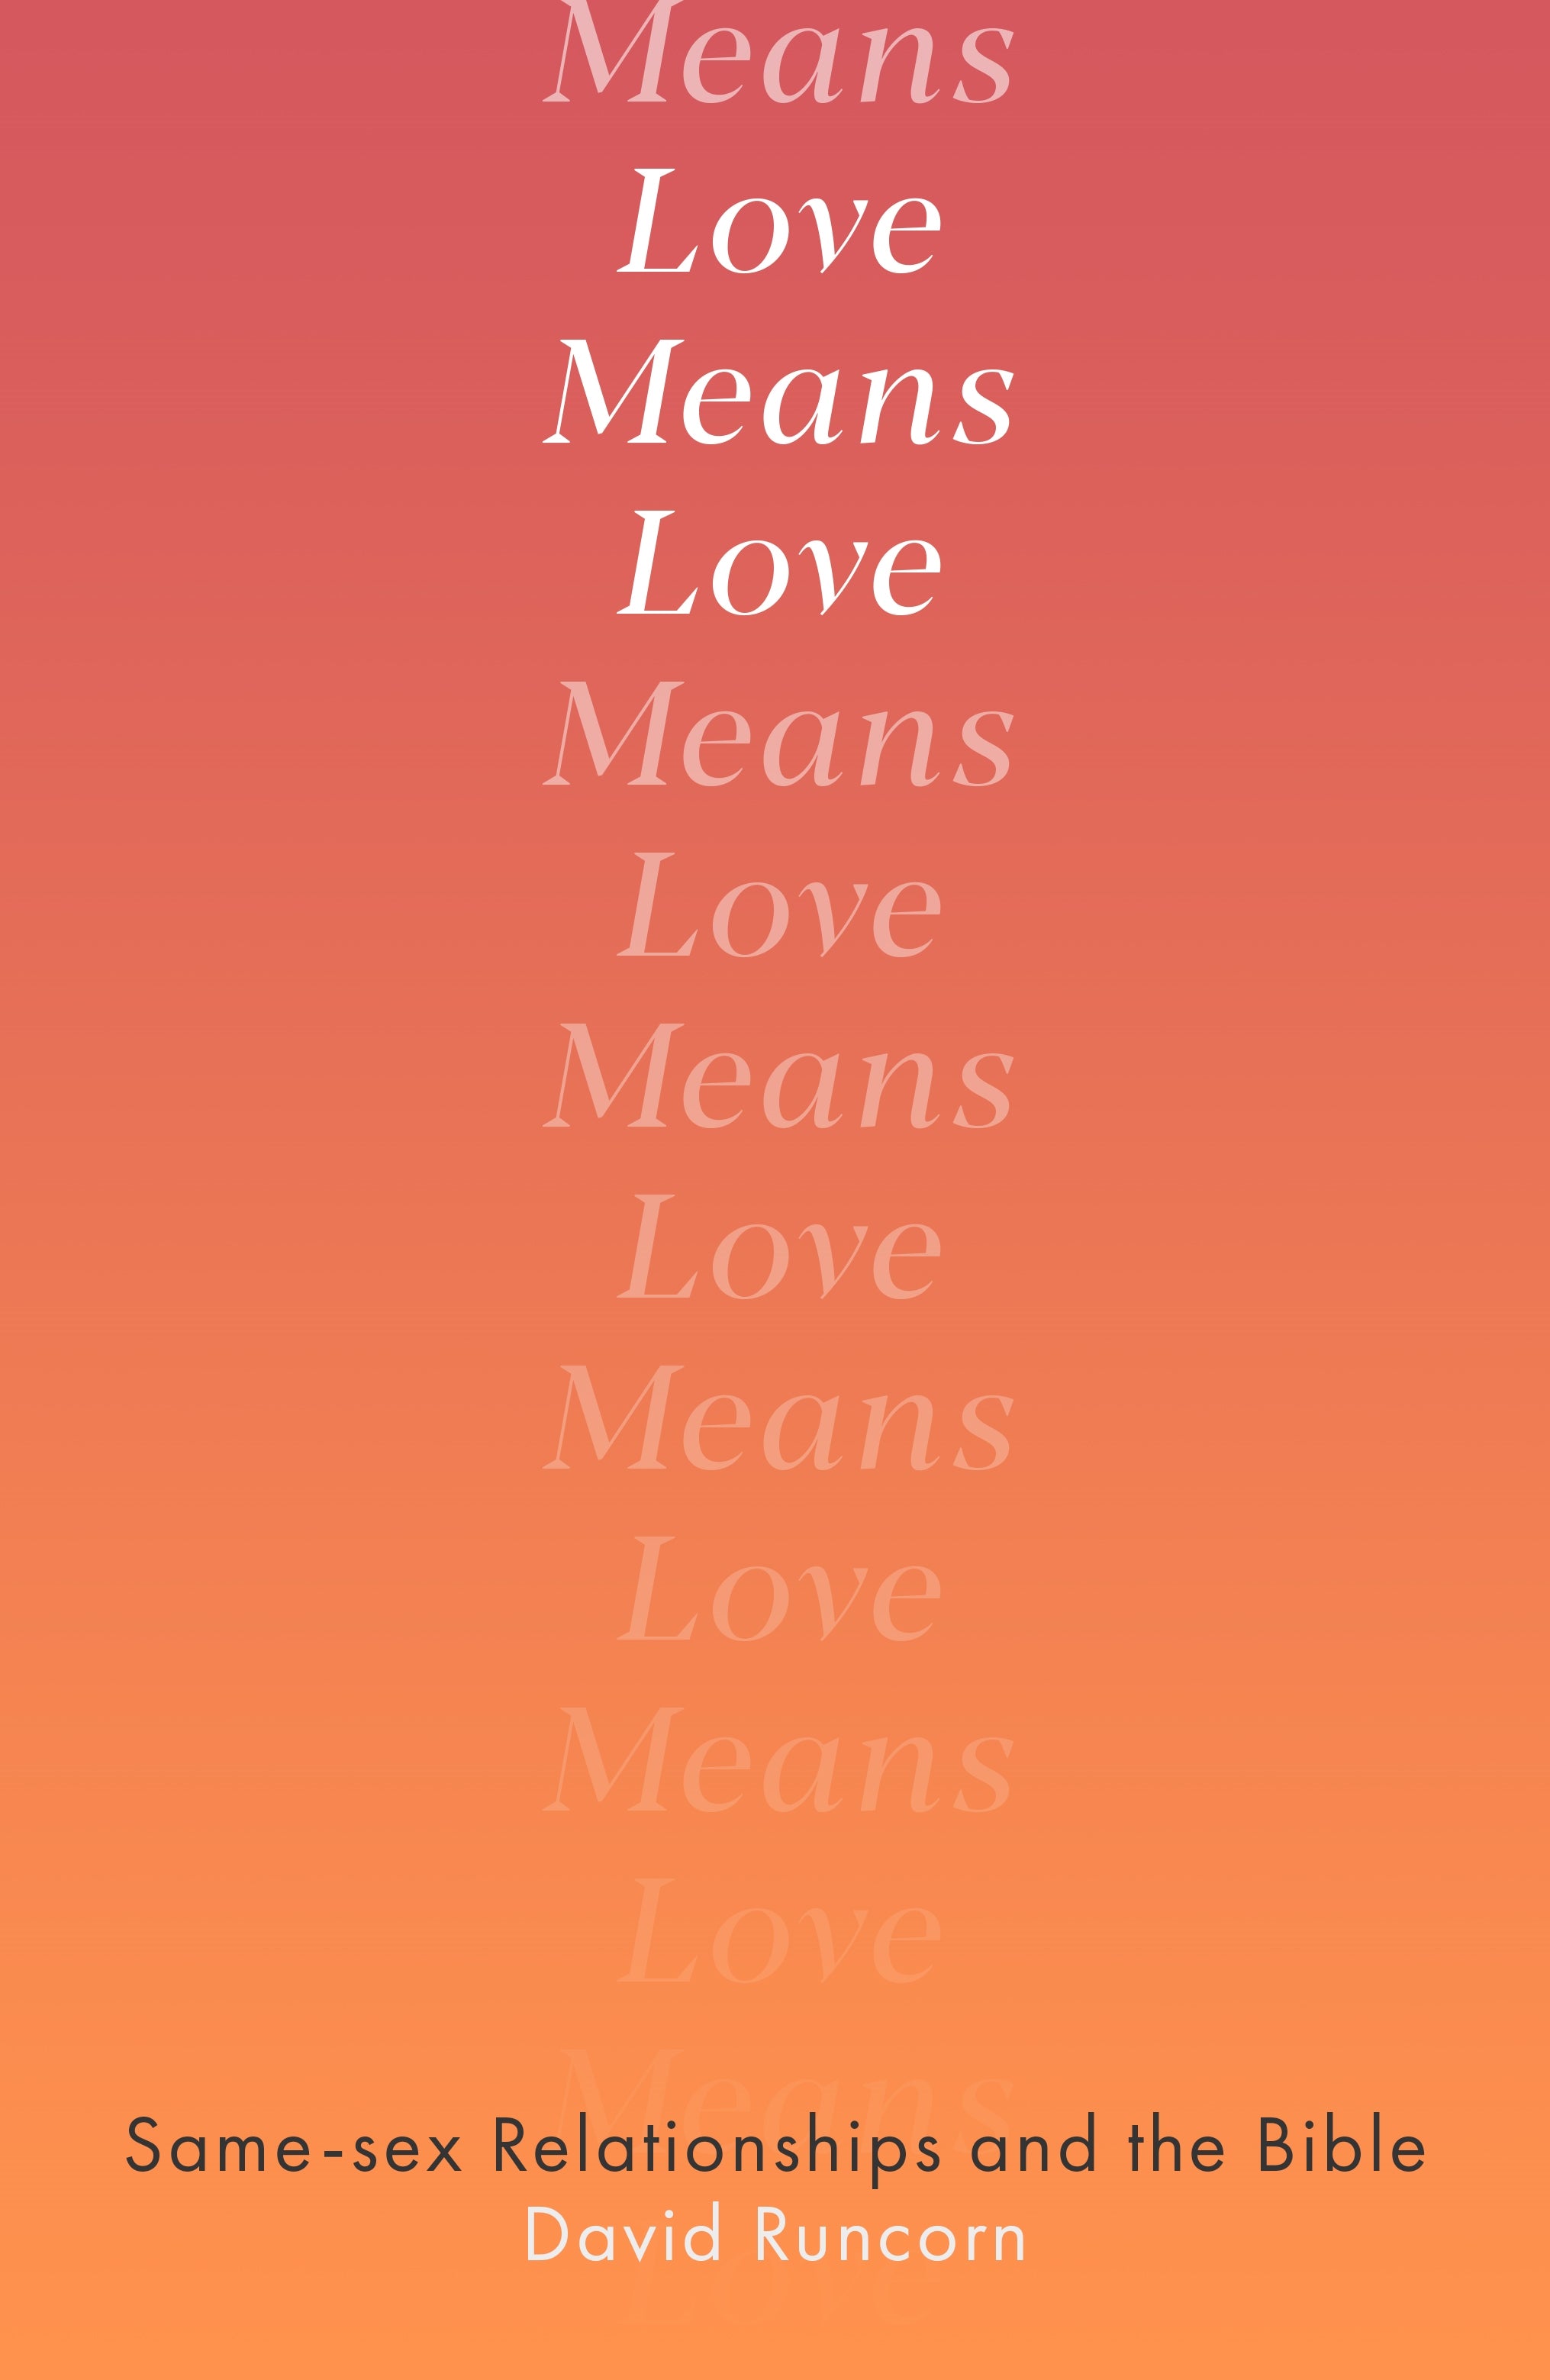 Image of Love Means Love other